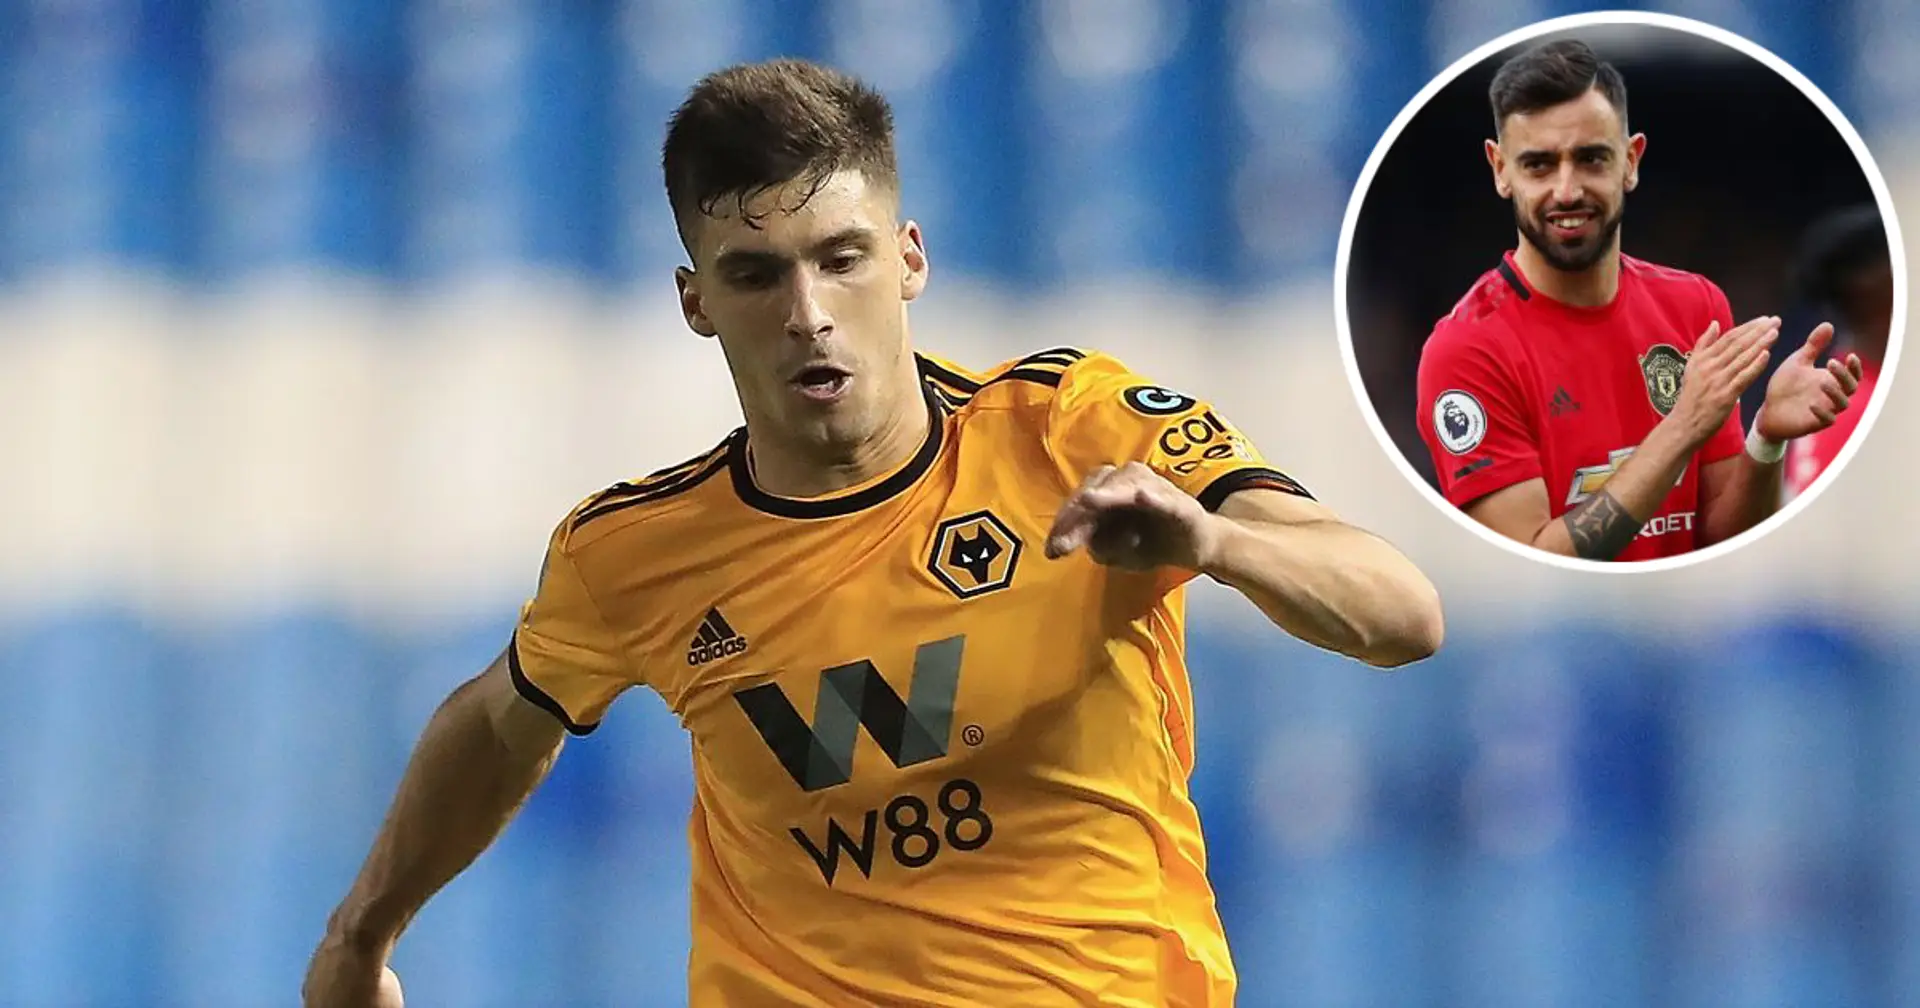 Wolves defender Ruben Vinagre not surprised by Bruno's impact: 'I followed Sporting and it was clear that he was a different player'